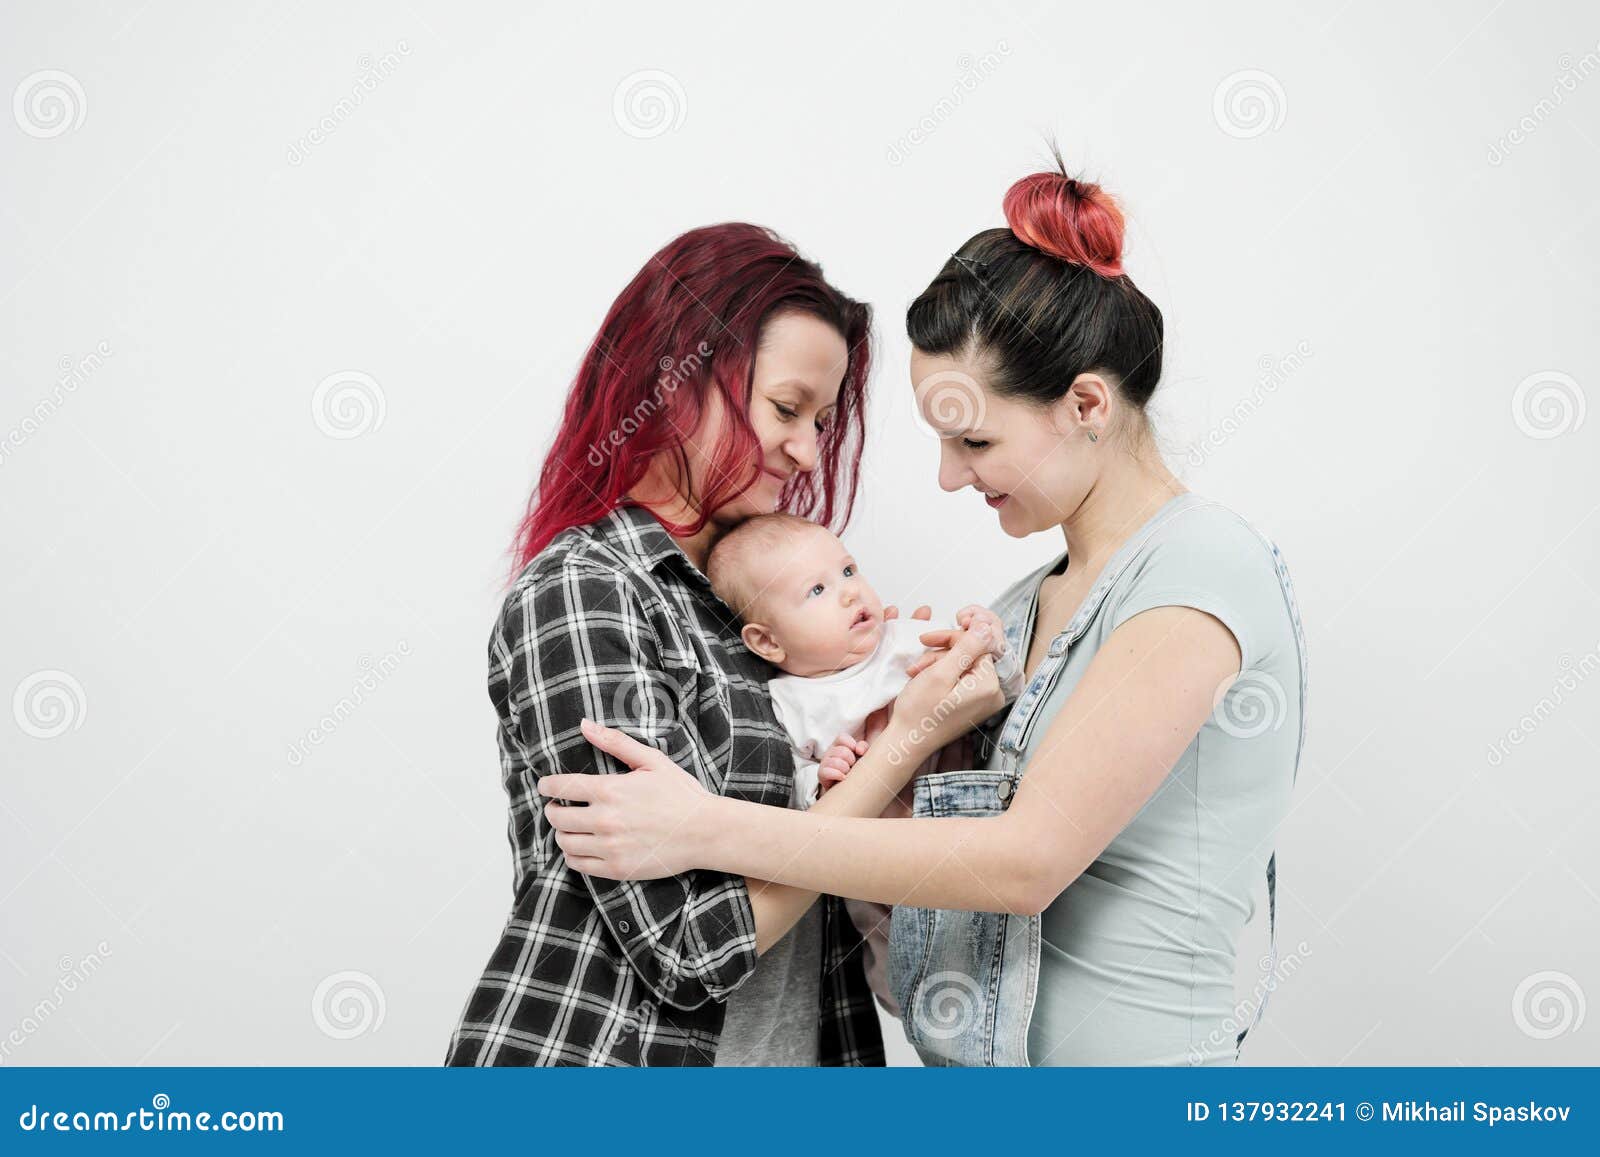 Two Young Women with a Baby on a White Background photo